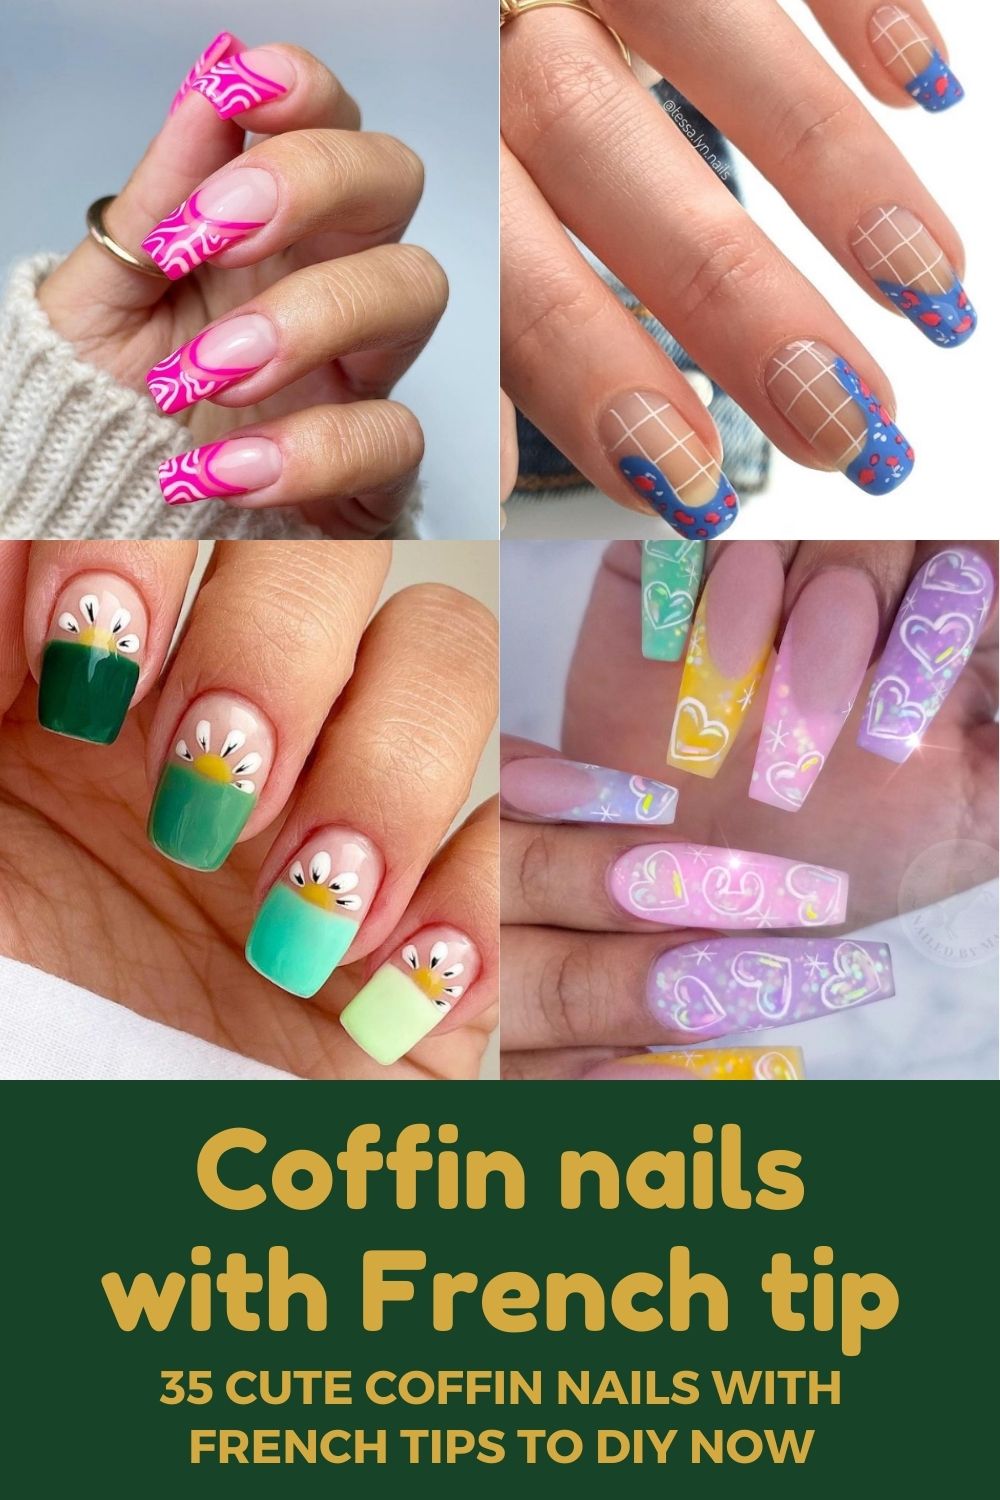 Coffin nails with French tip |35 Cute Nails With French Tips To DIY Now